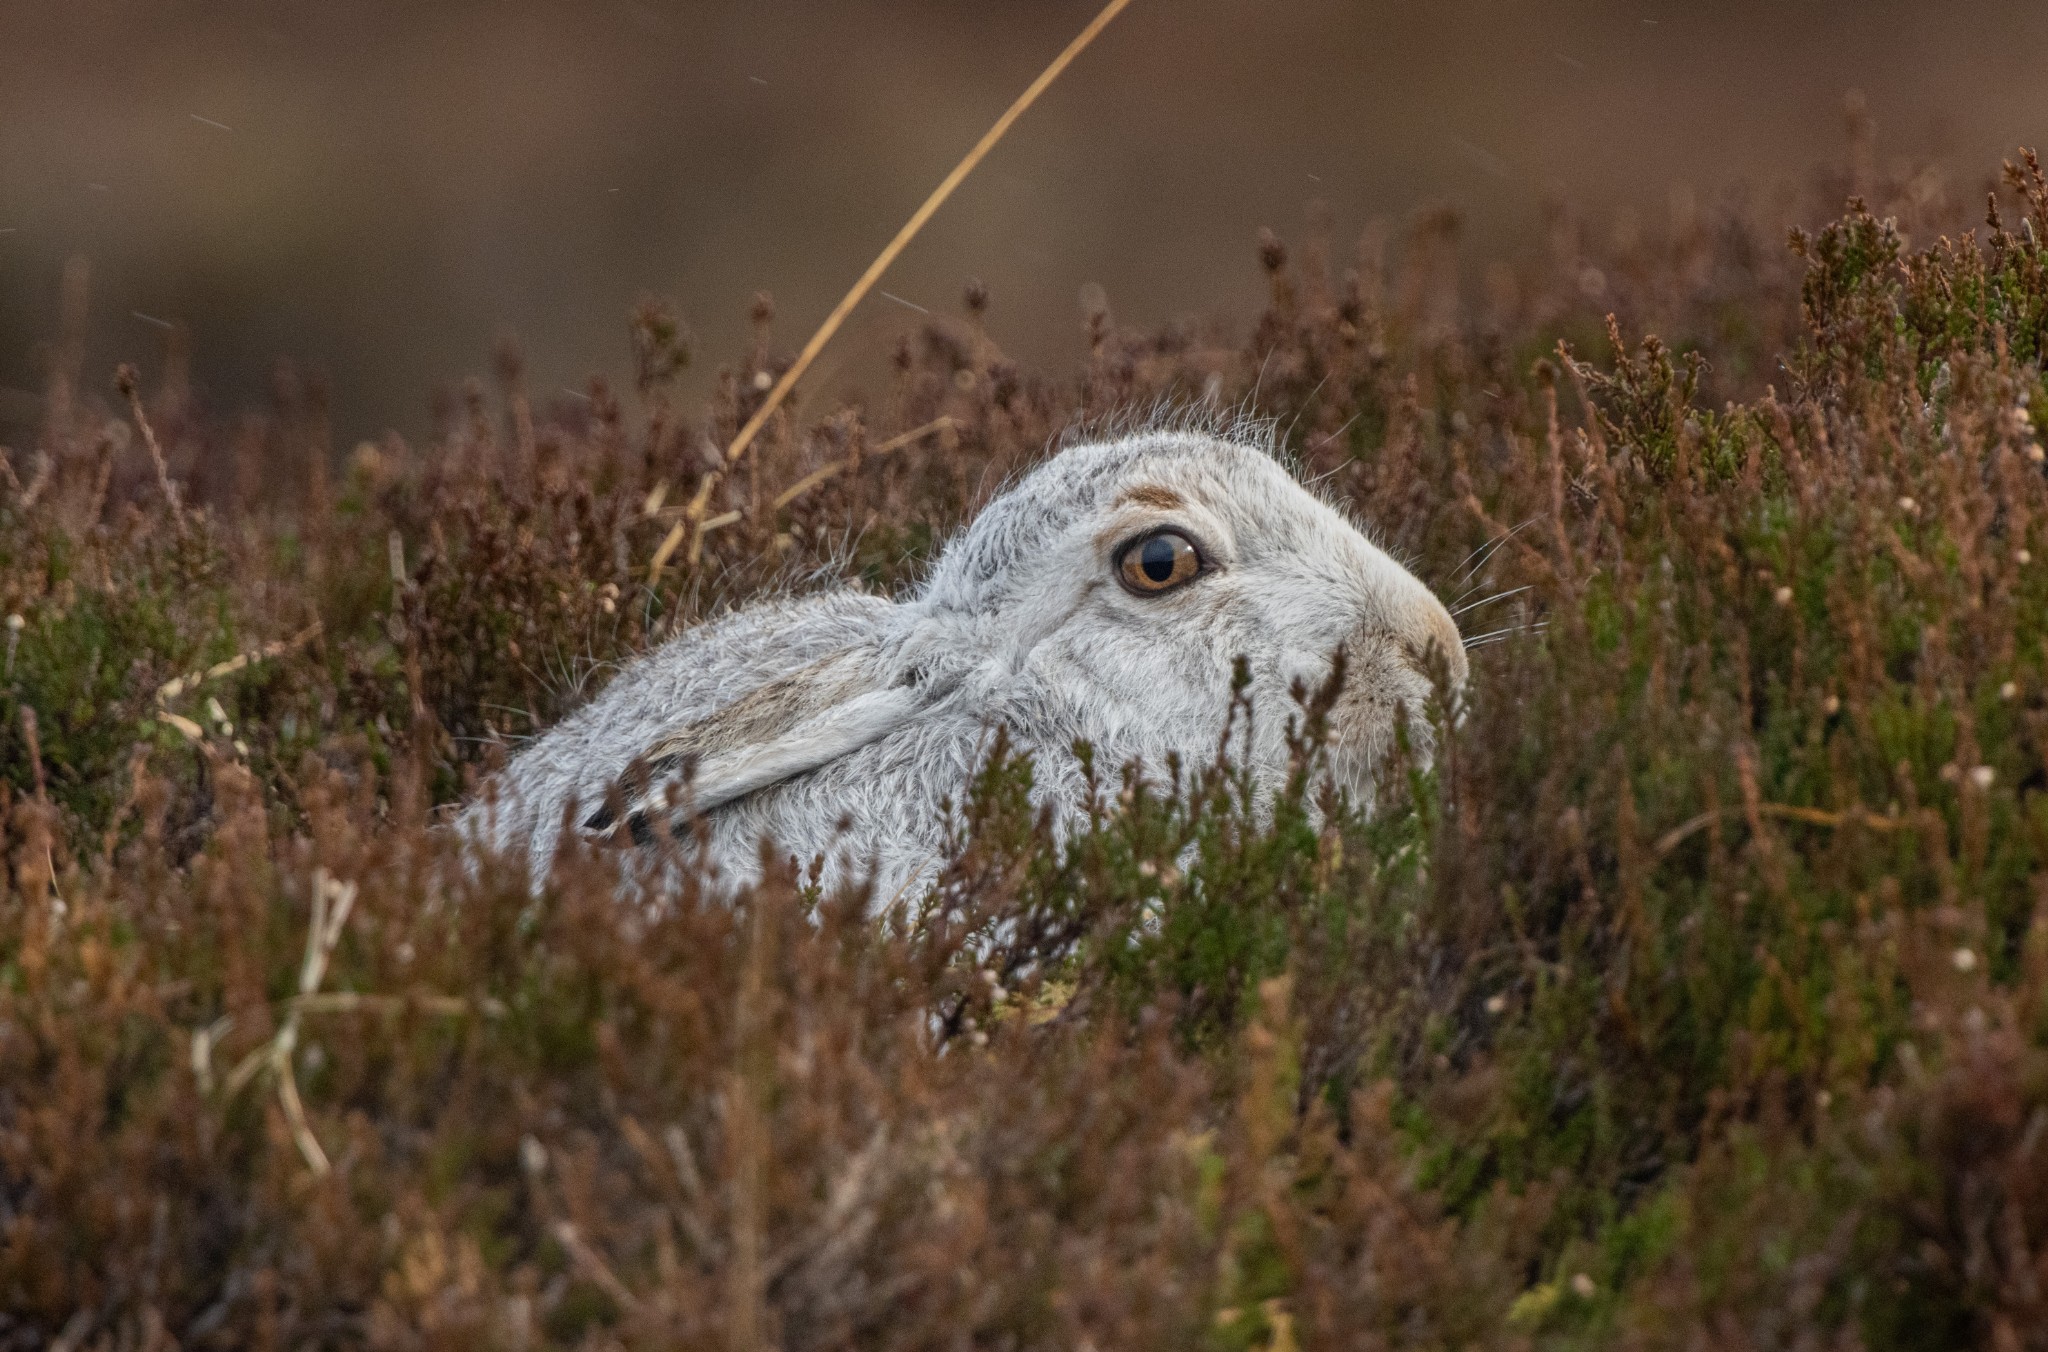 Mountain hare in Hoy, Orkney - image by Raymond Besant